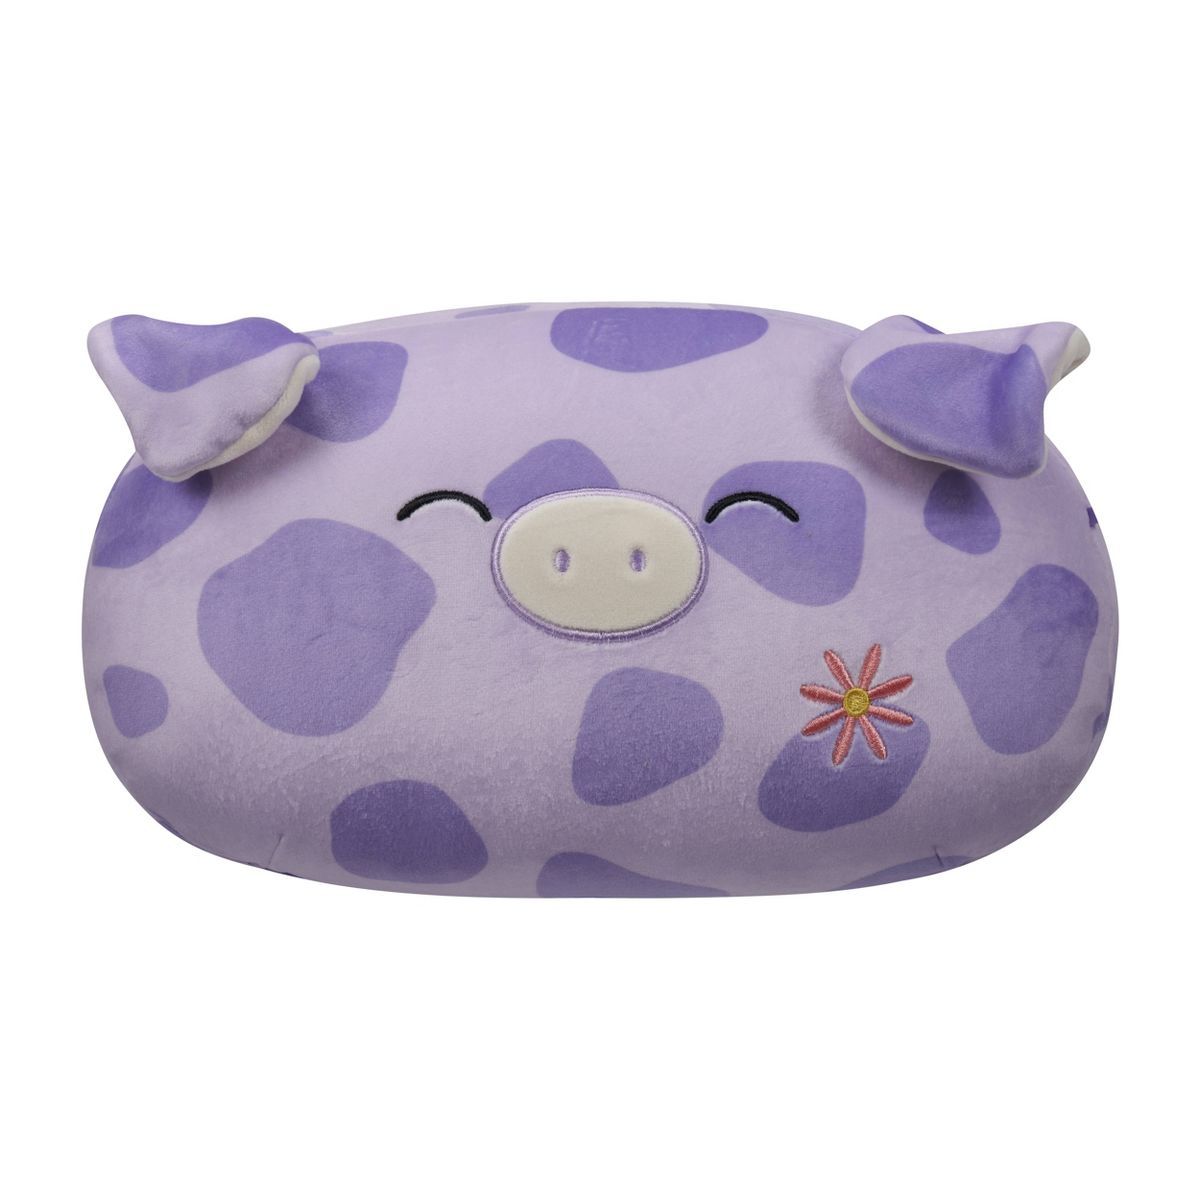 Squishmallows 12" Pammy Purple Spotted Pig with Flower Embroidery Medium Stackable Plush | Target